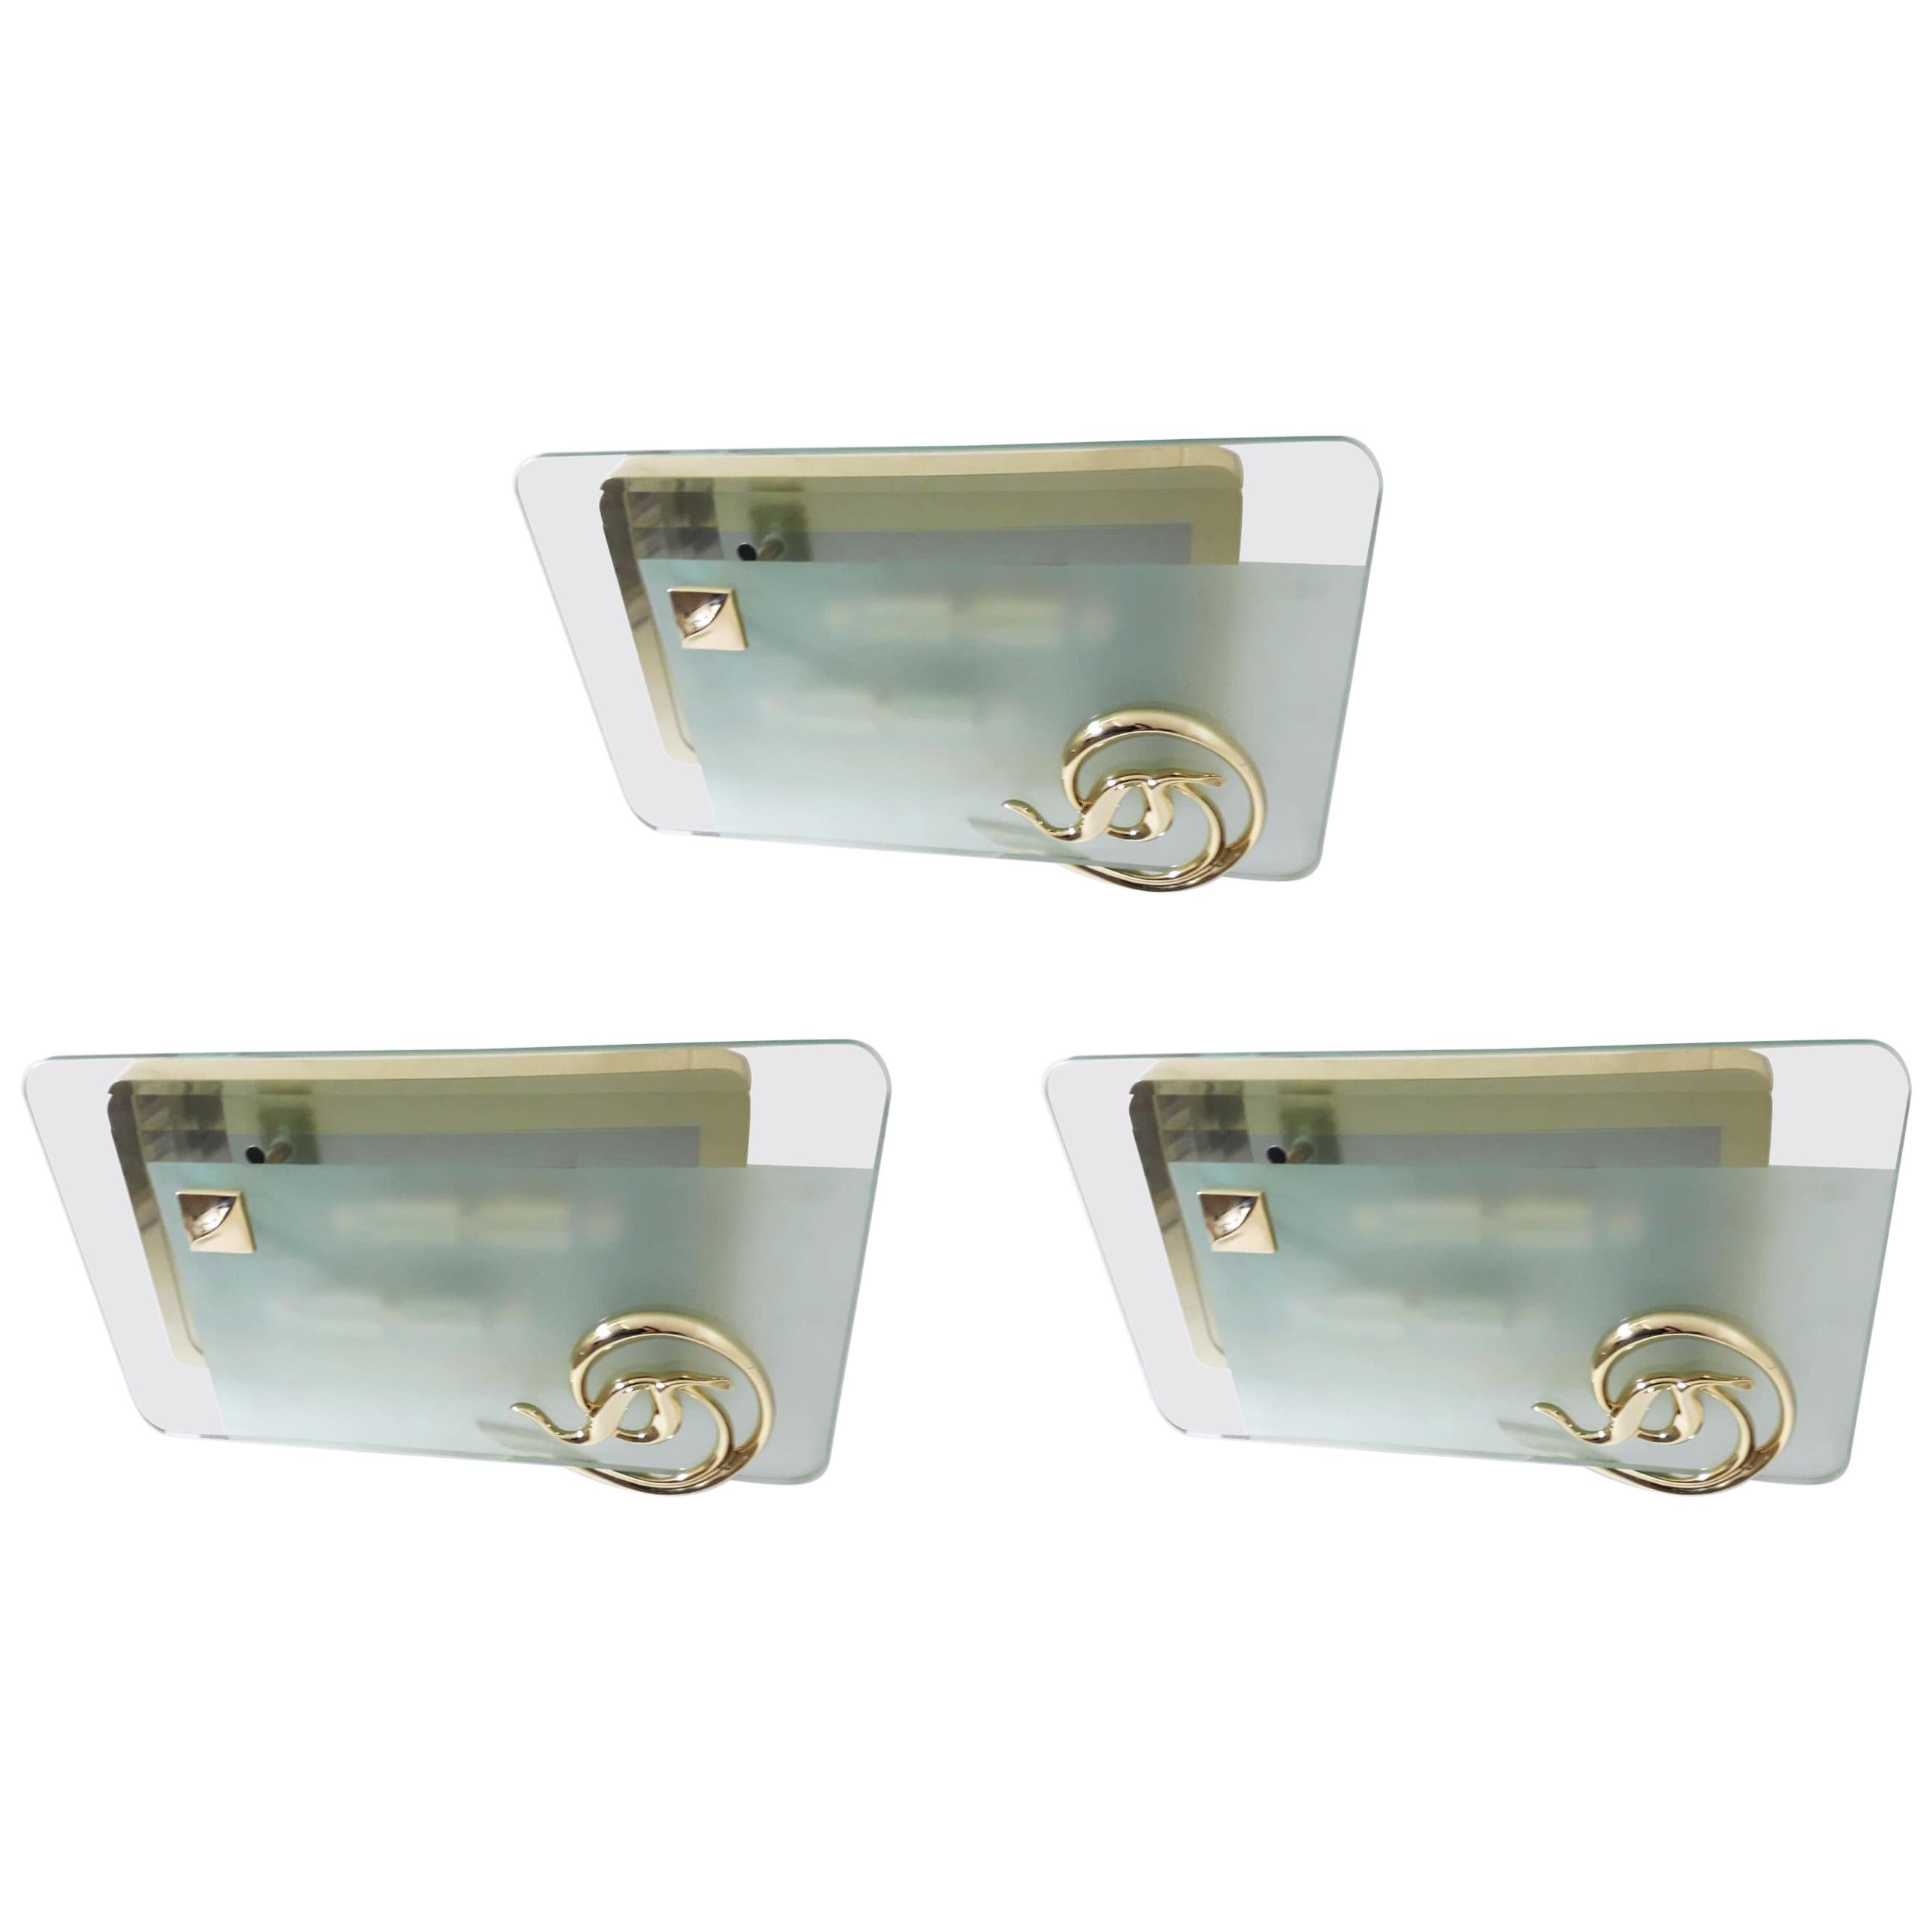 Vintage Italian wall lights or flush mounts with thick rectangular beveled glass diffuser mounted on gold plated solid brass frame, inspired by Fontana Arte, made by Fratelli Martini / Made in Italy, circa 1970s
4 lights / E14 type / max 40W